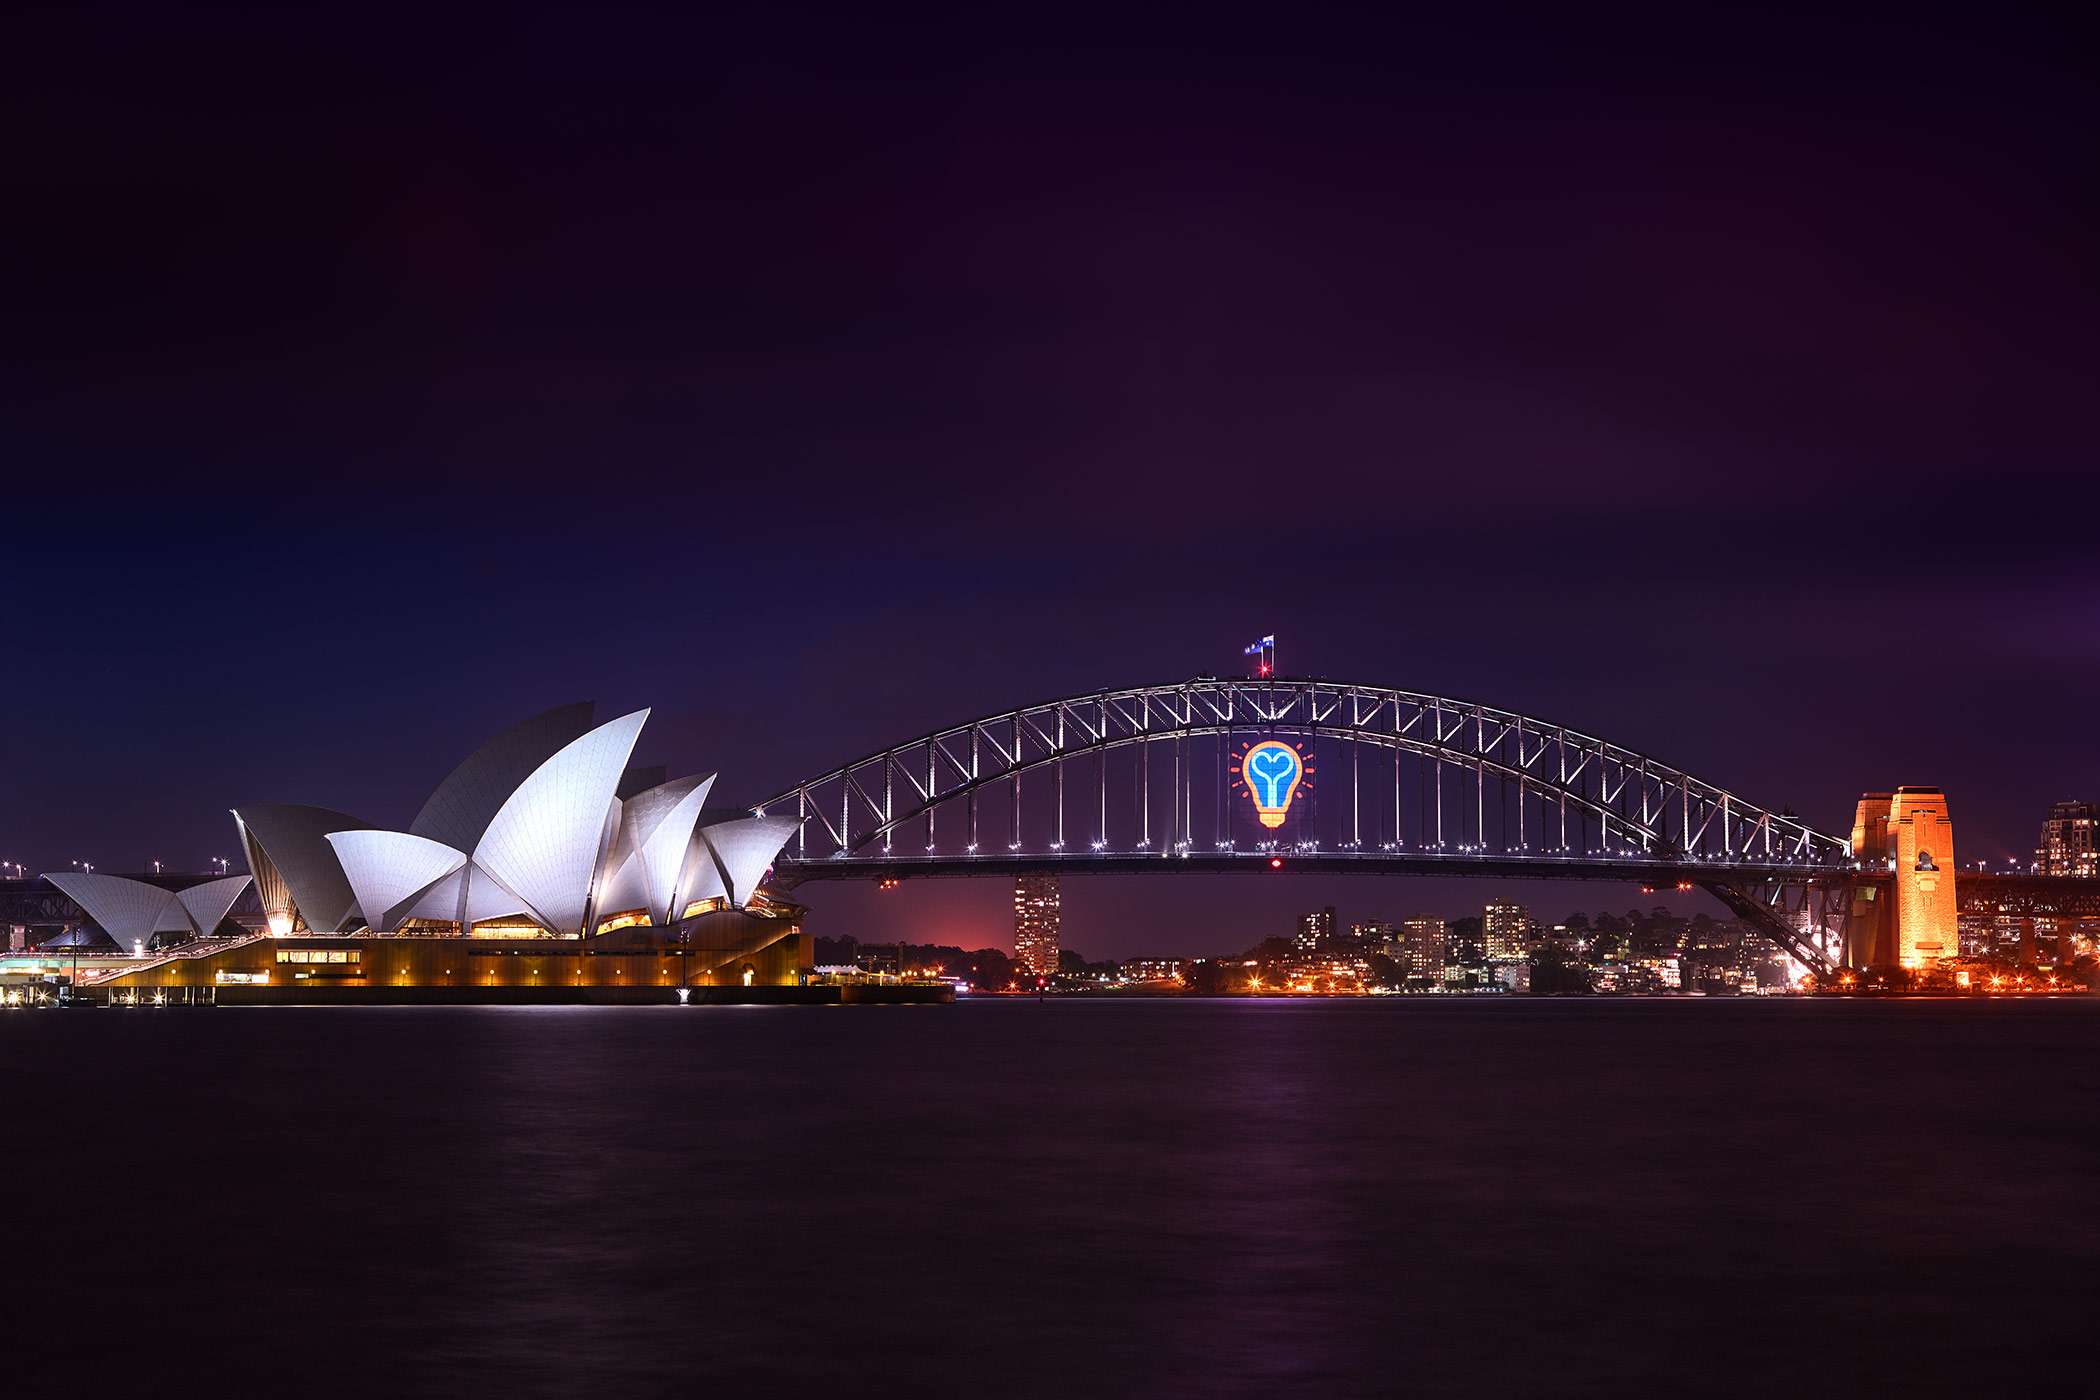 Back Down-Under : Sydney Cityscapes Revisited